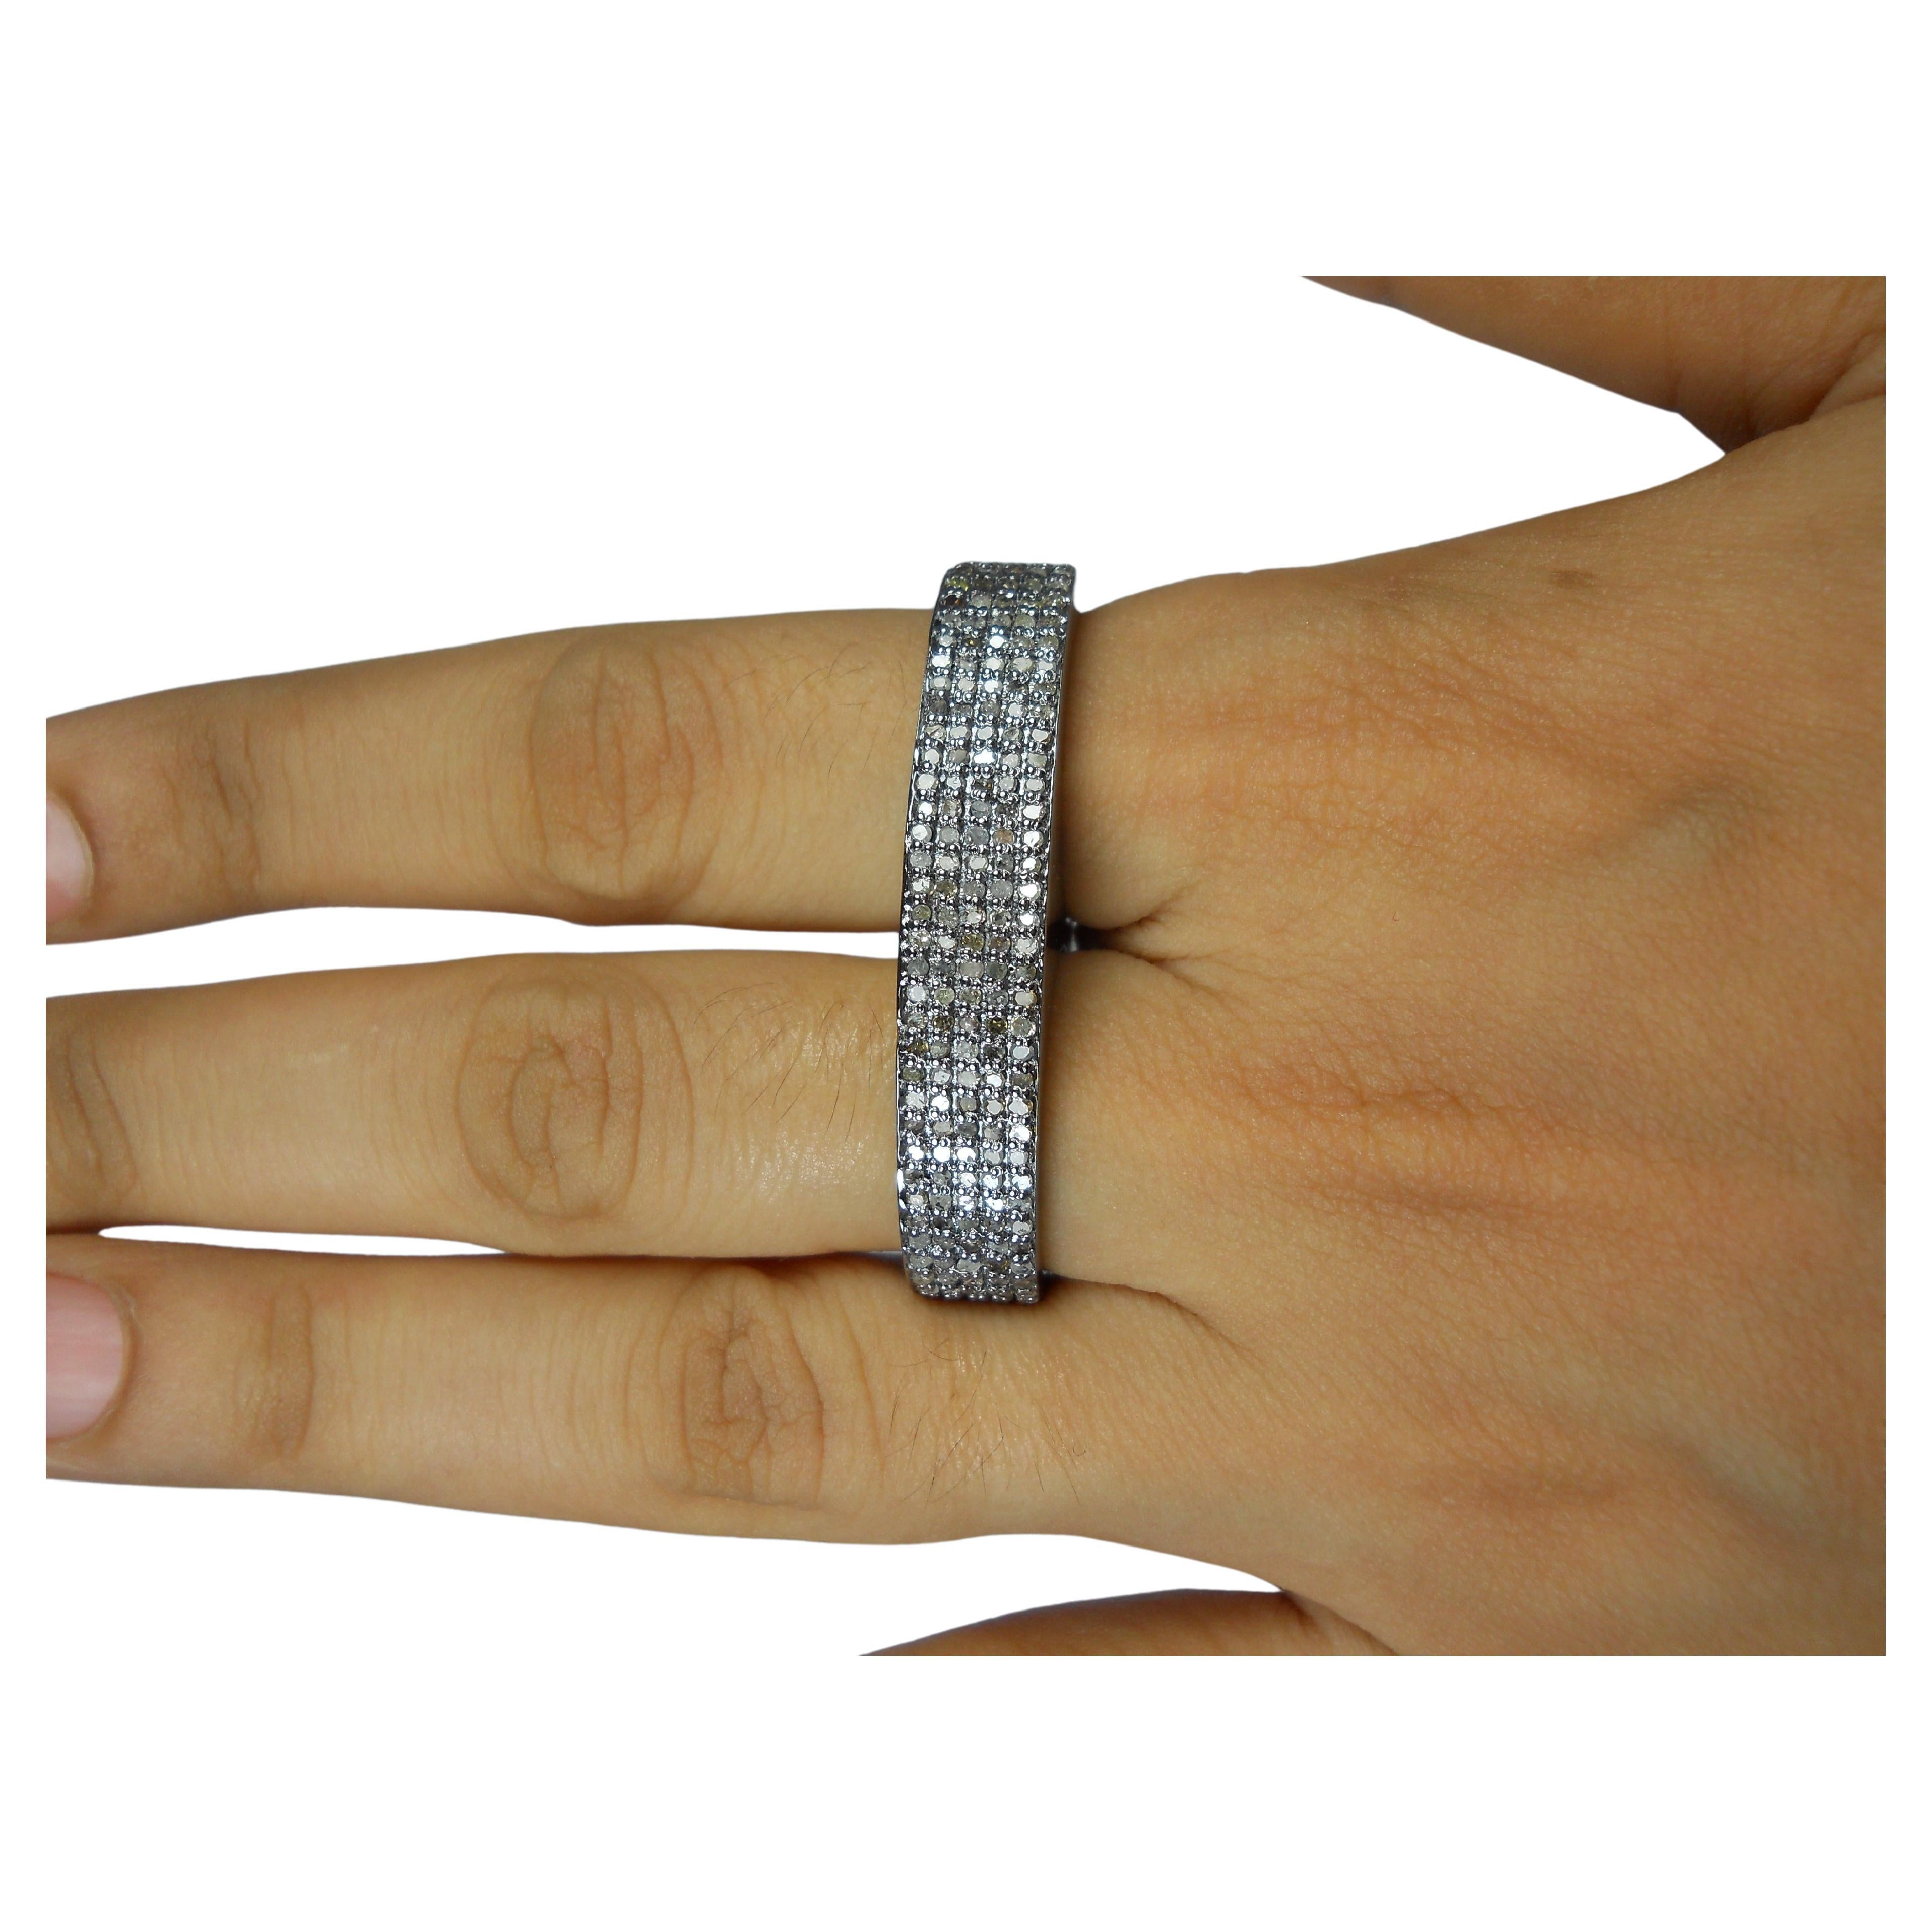 Two finger ring natural pave diamonds sterling silver oxidized vintage look ring For Sale